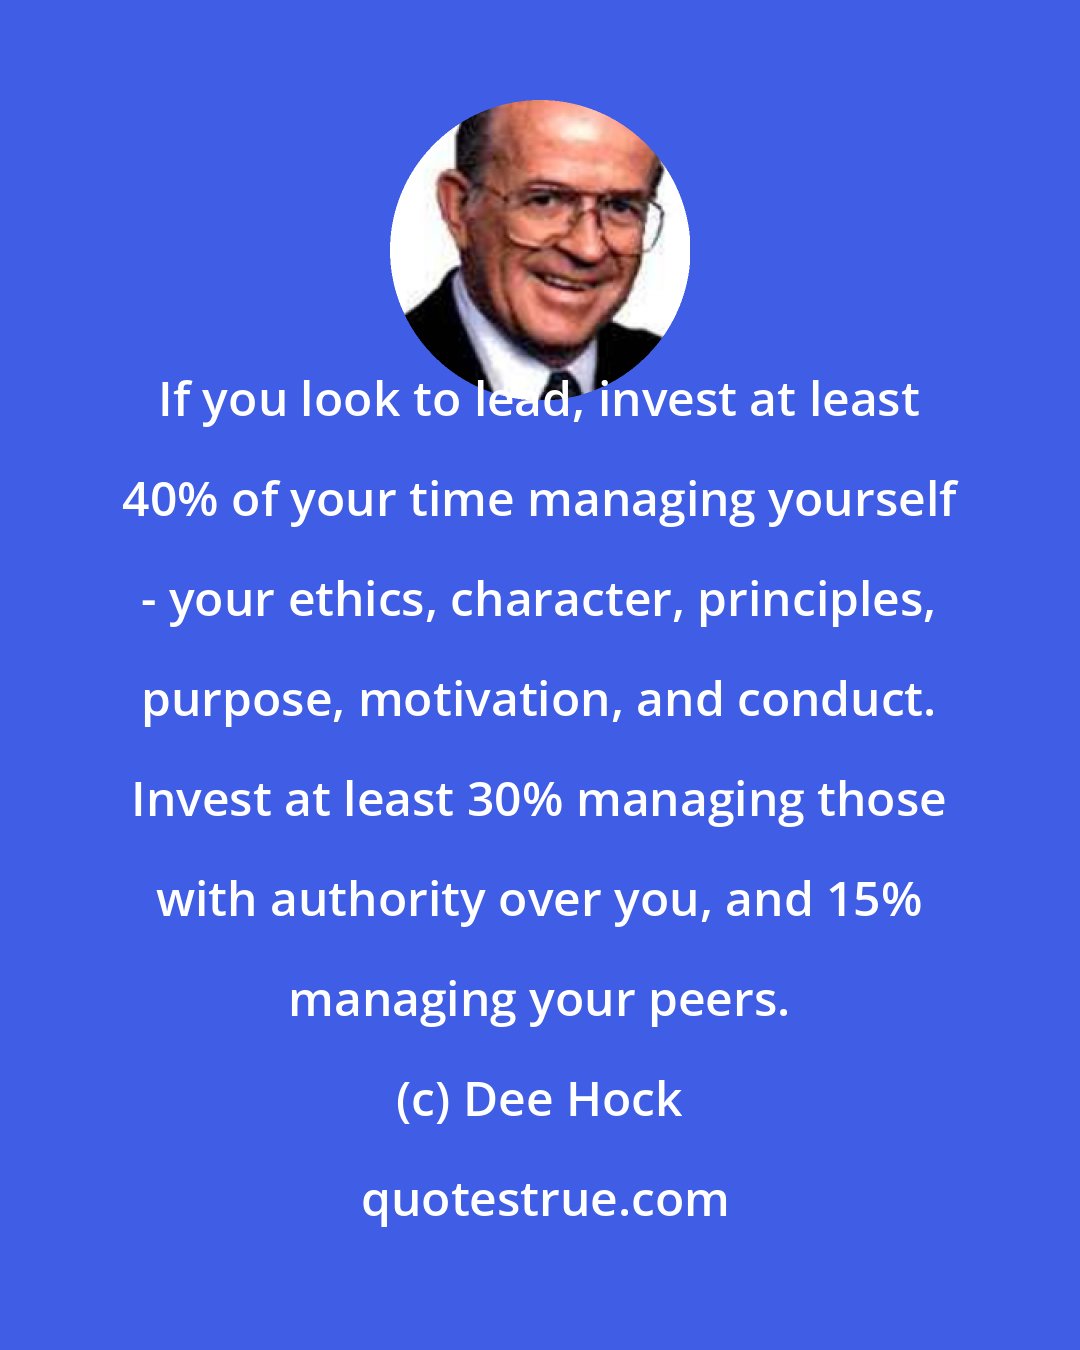 Dee Hock: If you look to lead, invest at least 40% of your time managing yourself - your ethics, character, principles, purpose, motivation, and conduct. Invest at least 30% managing those with authority over you, and 15% managing your peers.